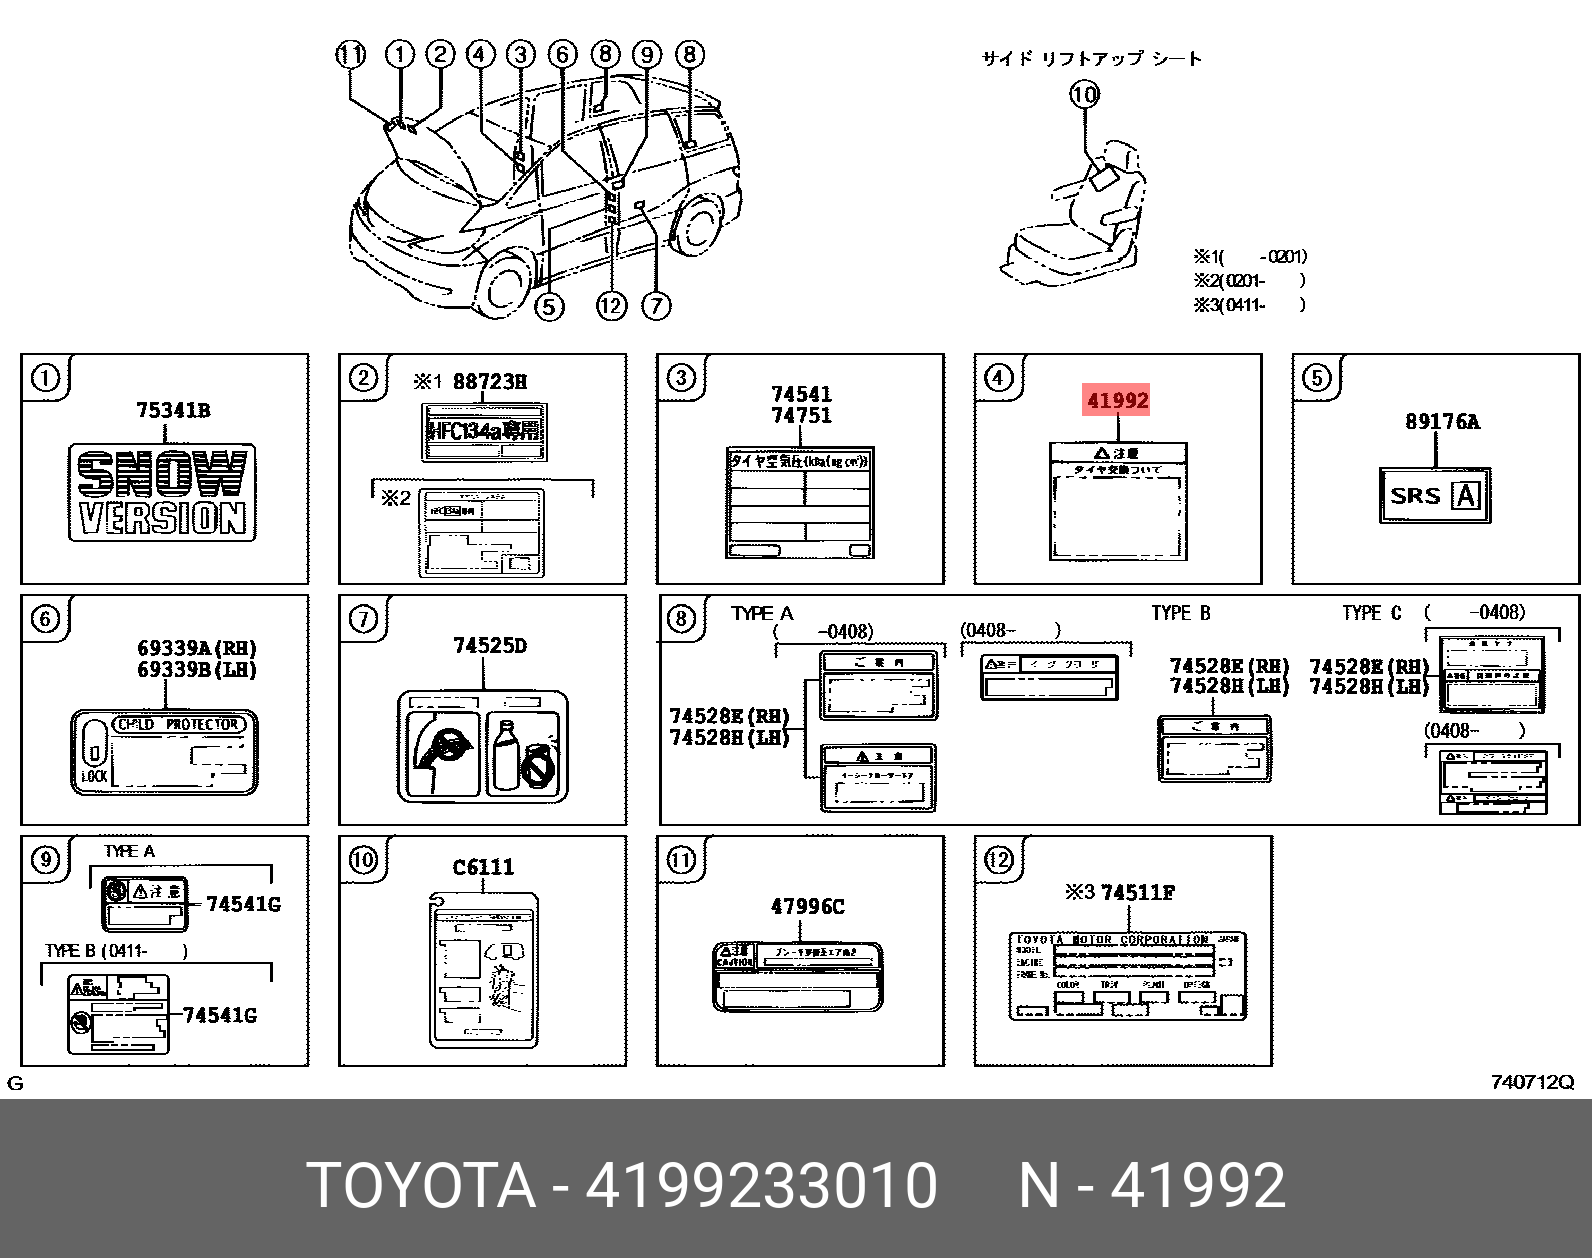 CAMRY 200109 - 200601, LABEL, DIFFERENTIAL NOTICE